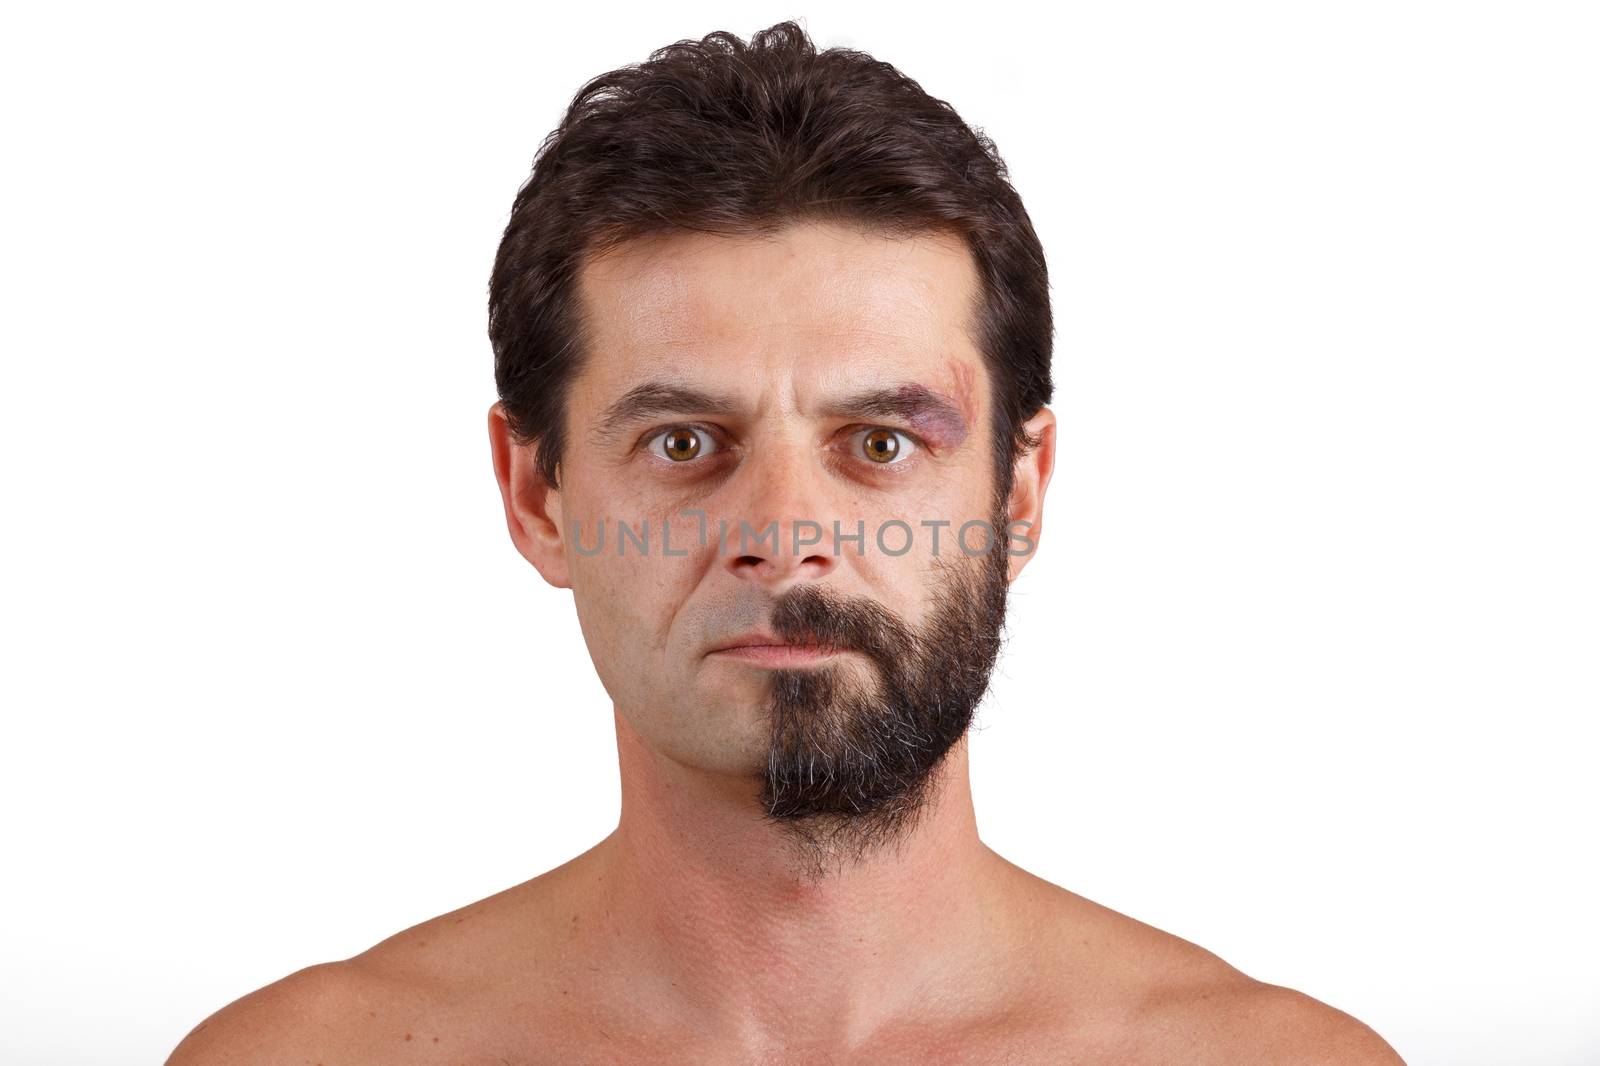 split personality - portrait of man with half shaved and unshaven face